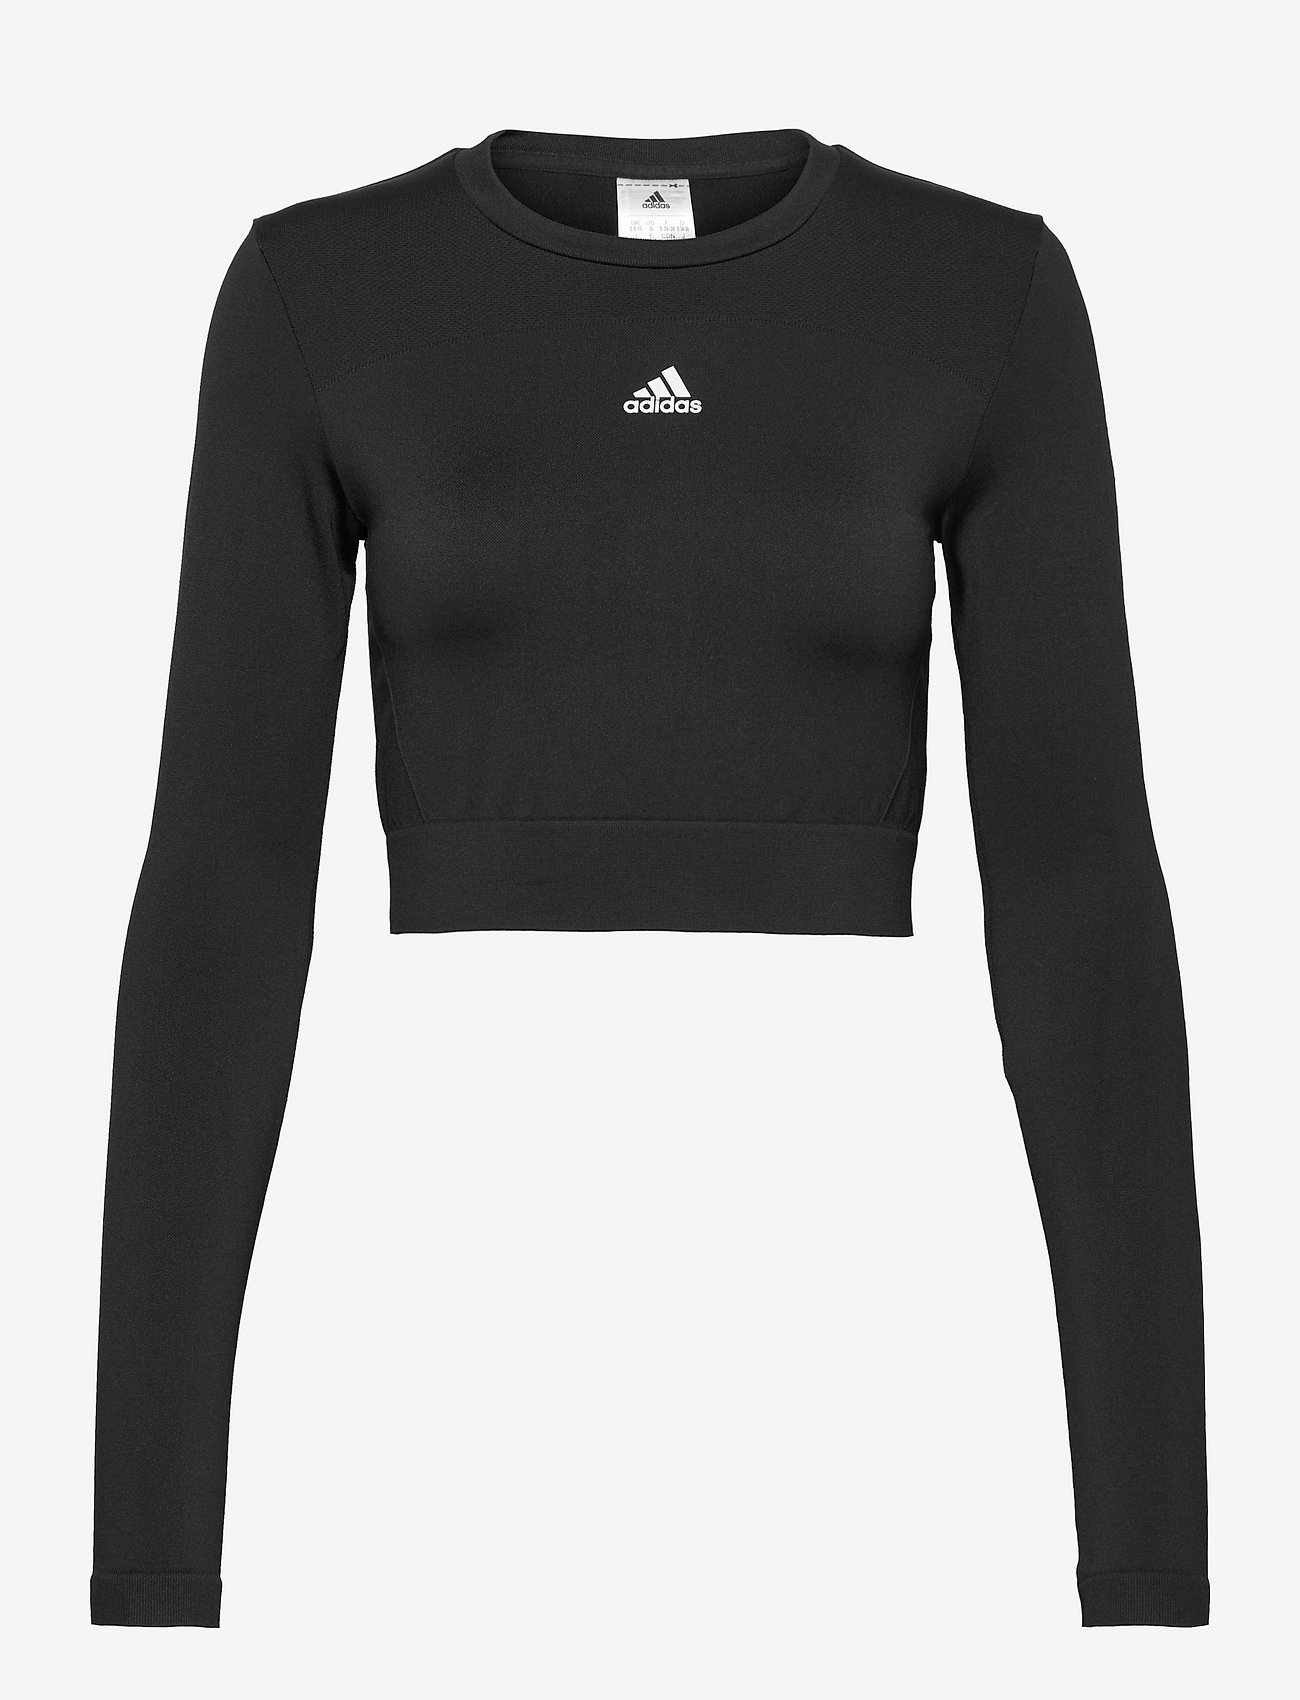 adidas Performance - adidas AEROKNIT Seamless Fitted Cropped Long-Sleeve Top - t-shirt & tops - black/white - 0